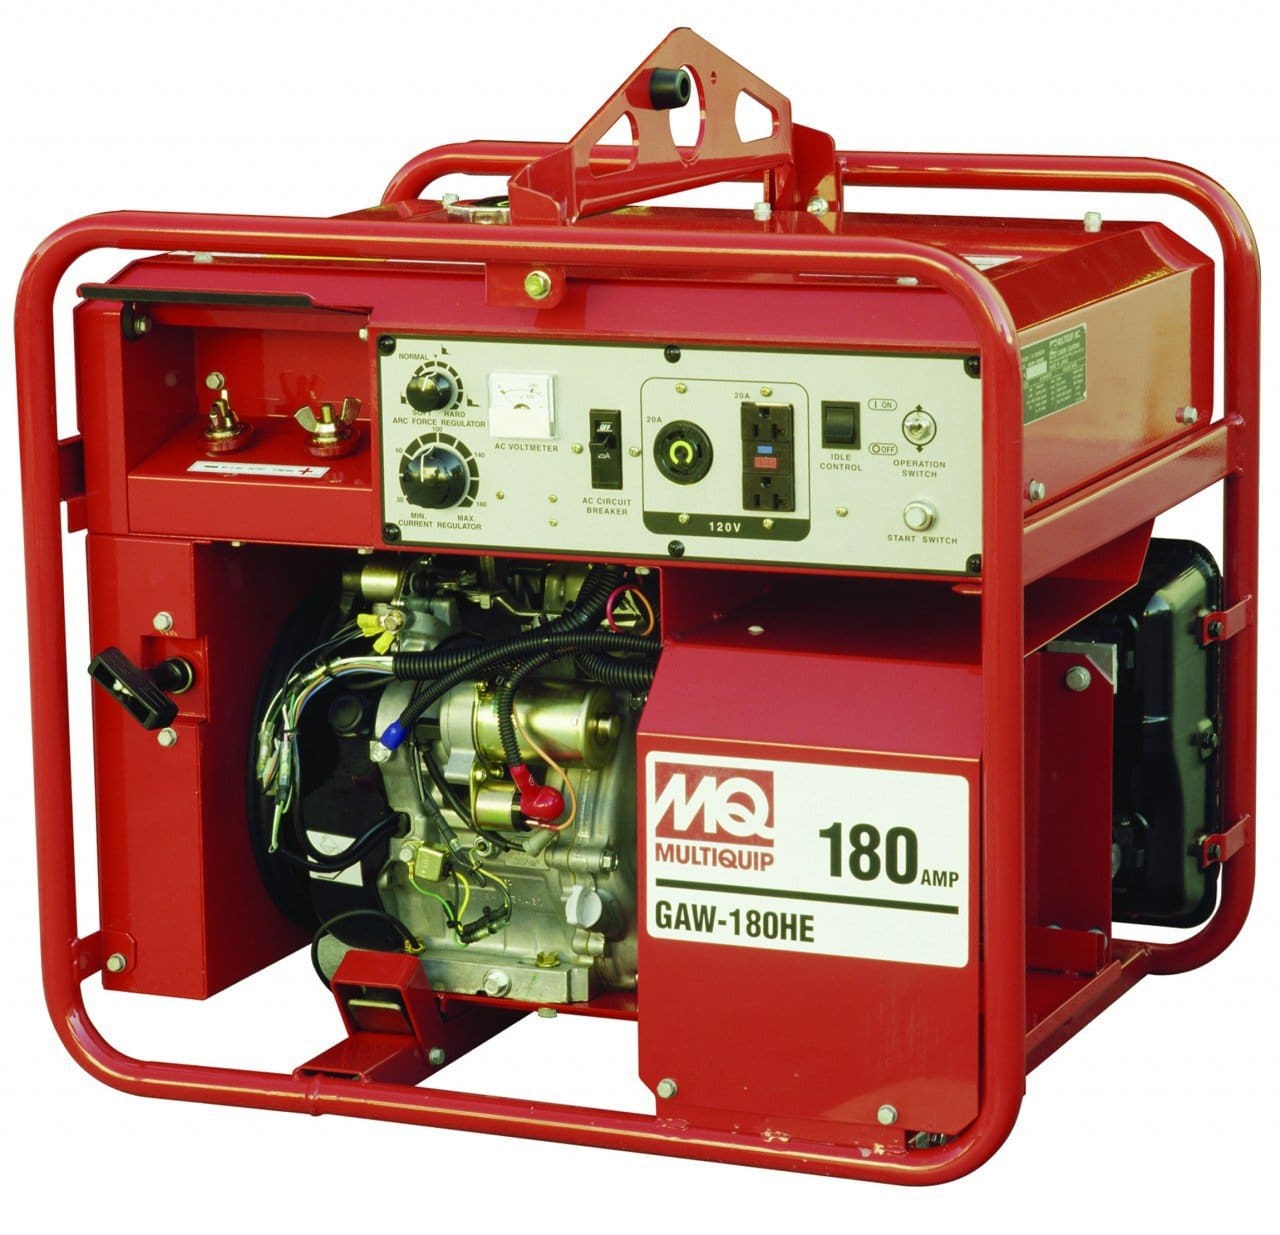 Max Duty Cycle
w/ Full Amps Availible
50% @180 A




 	Ideal for job site and remote-area service applications